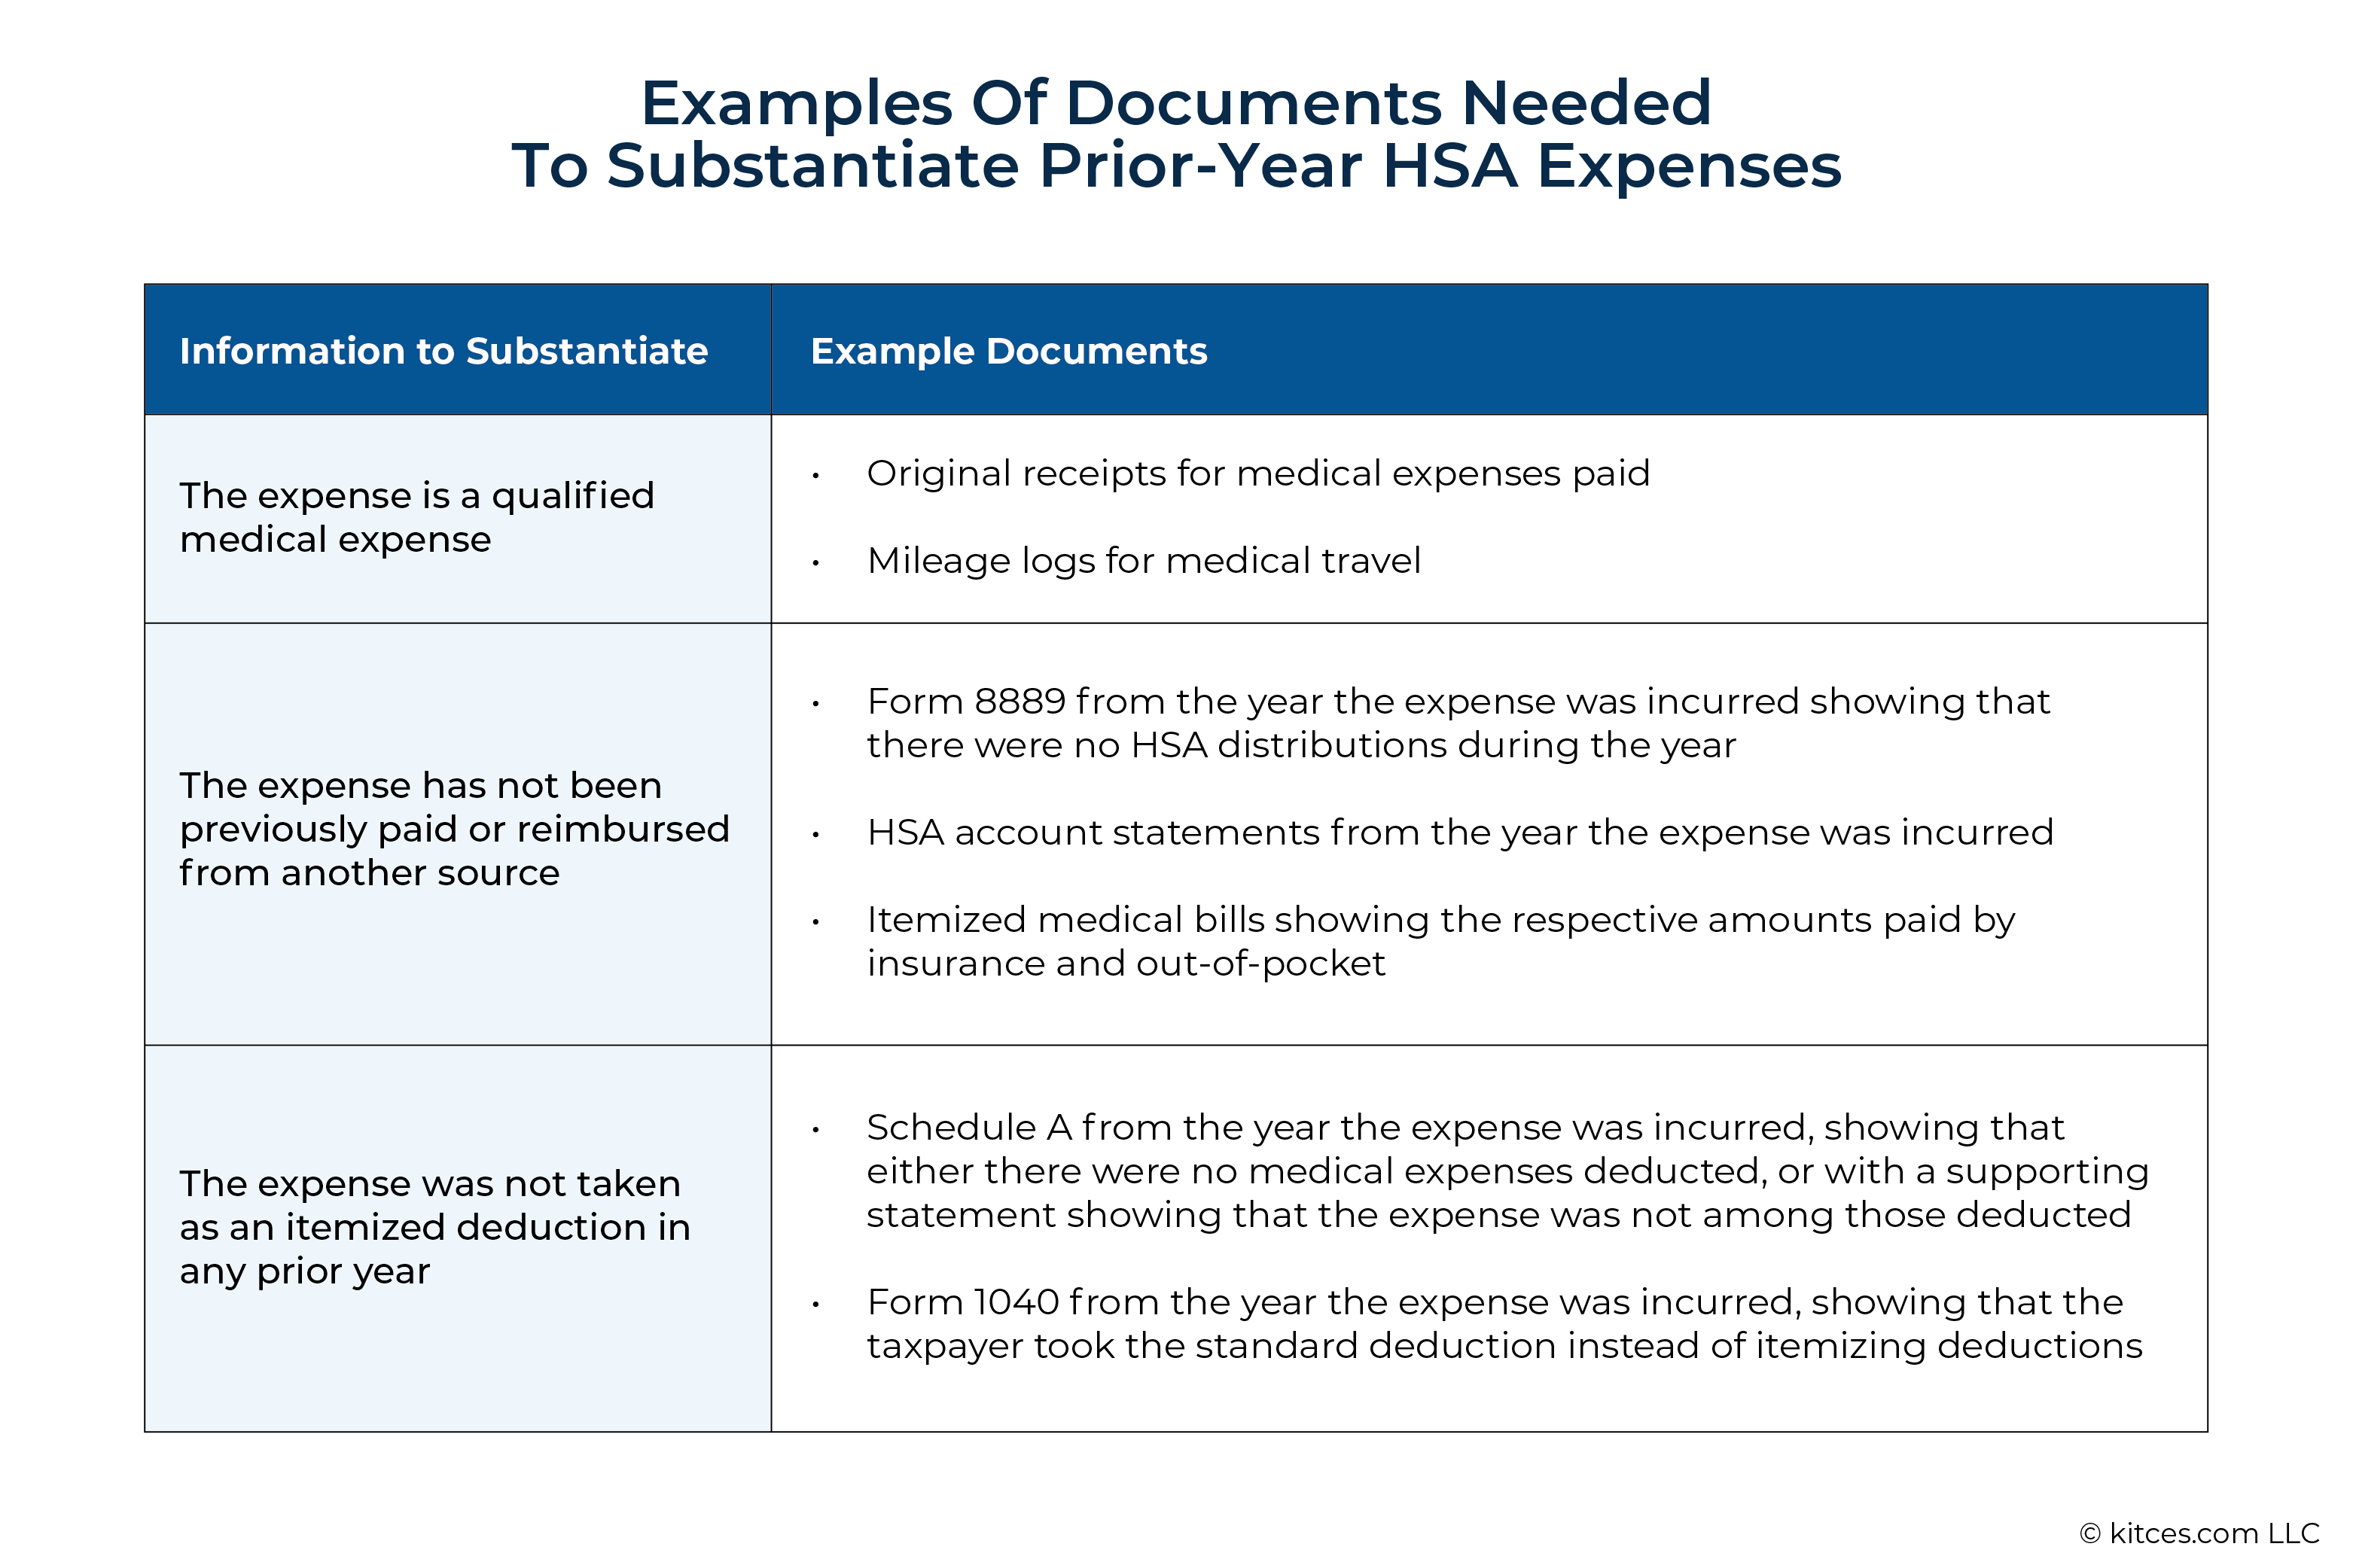 https://www.kitces.com/wp-content/uploads/2023/02/05-Examples-Of-Documents-Needed-To-Substantiate-Prior-Year-HSA-Expenses.png